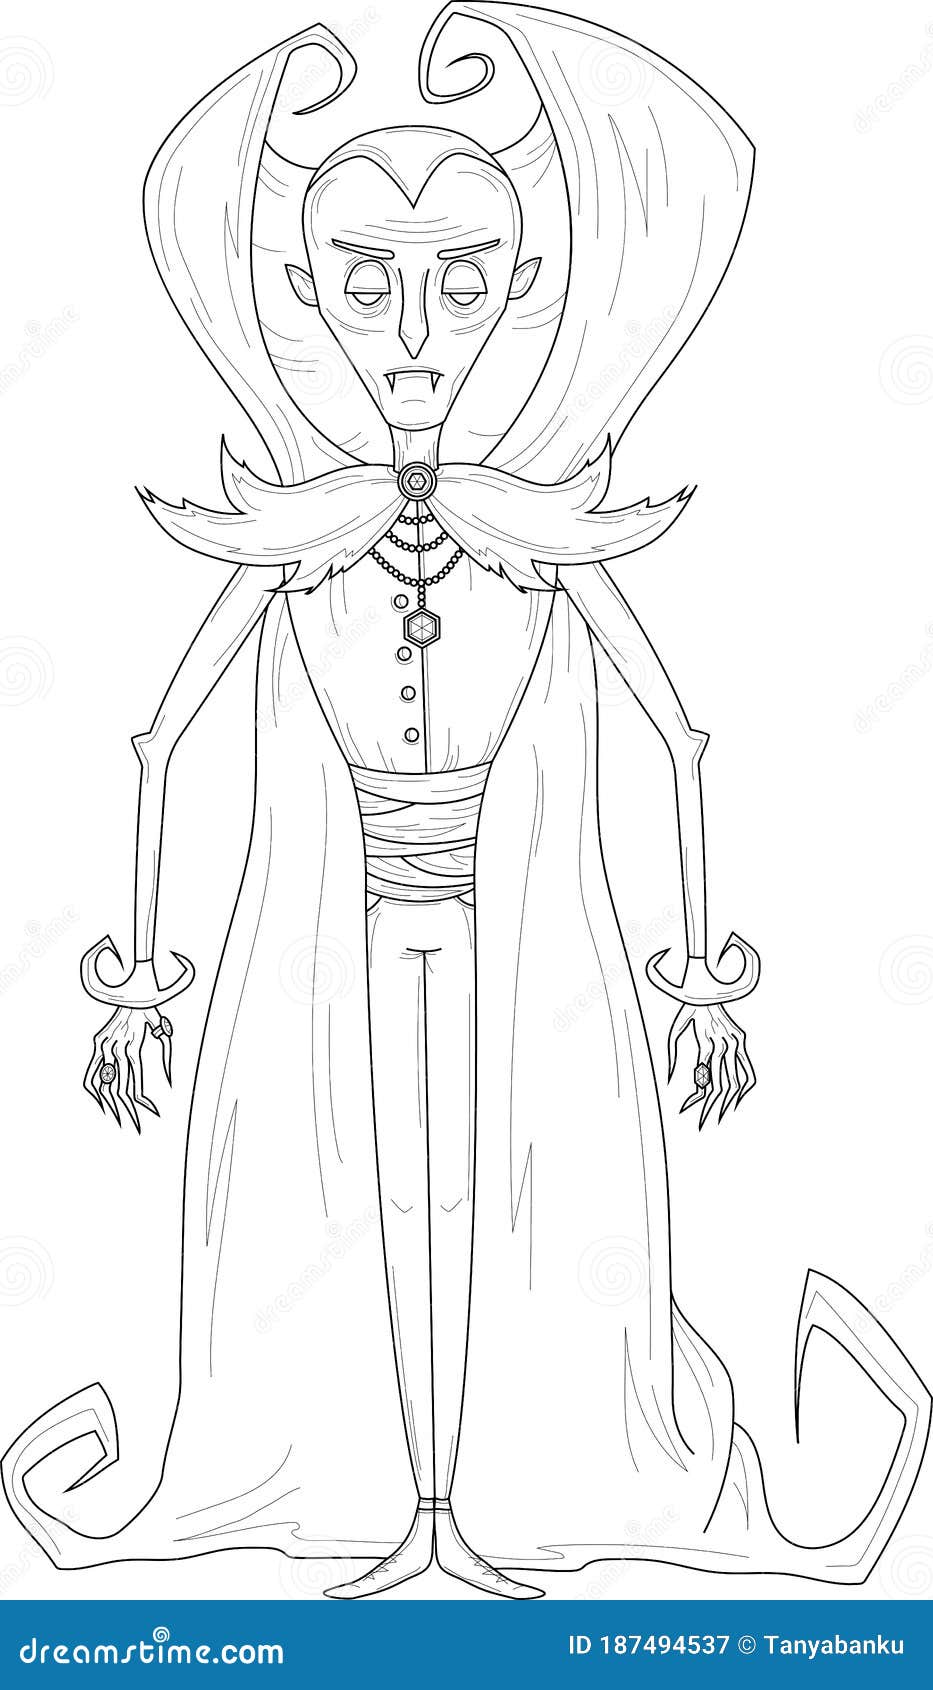 cartoon vampire character with cape.   in black and wite.